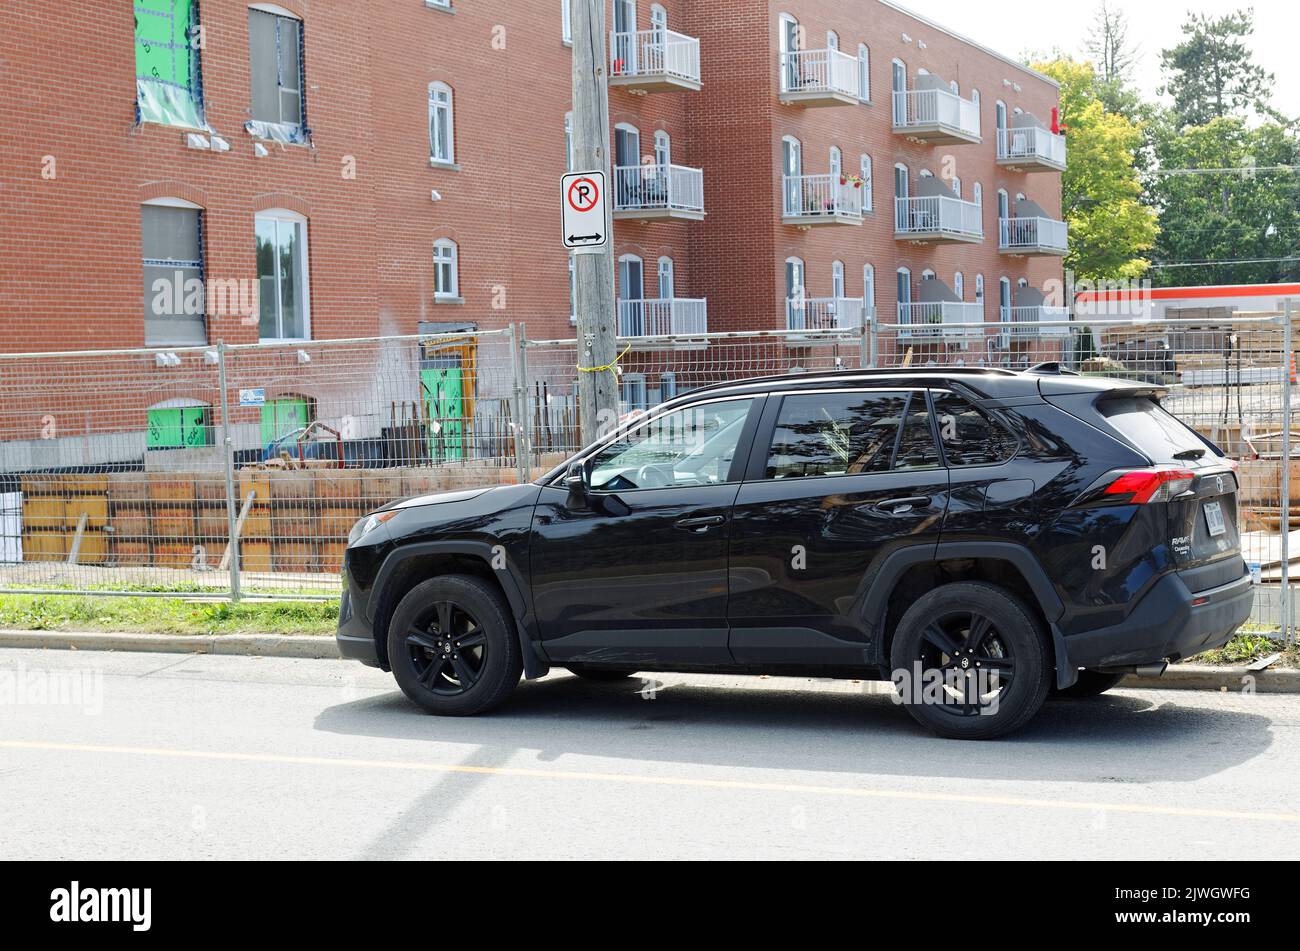 A black SUV parked in a no parking zone. Quebec,Canada Stock Photo